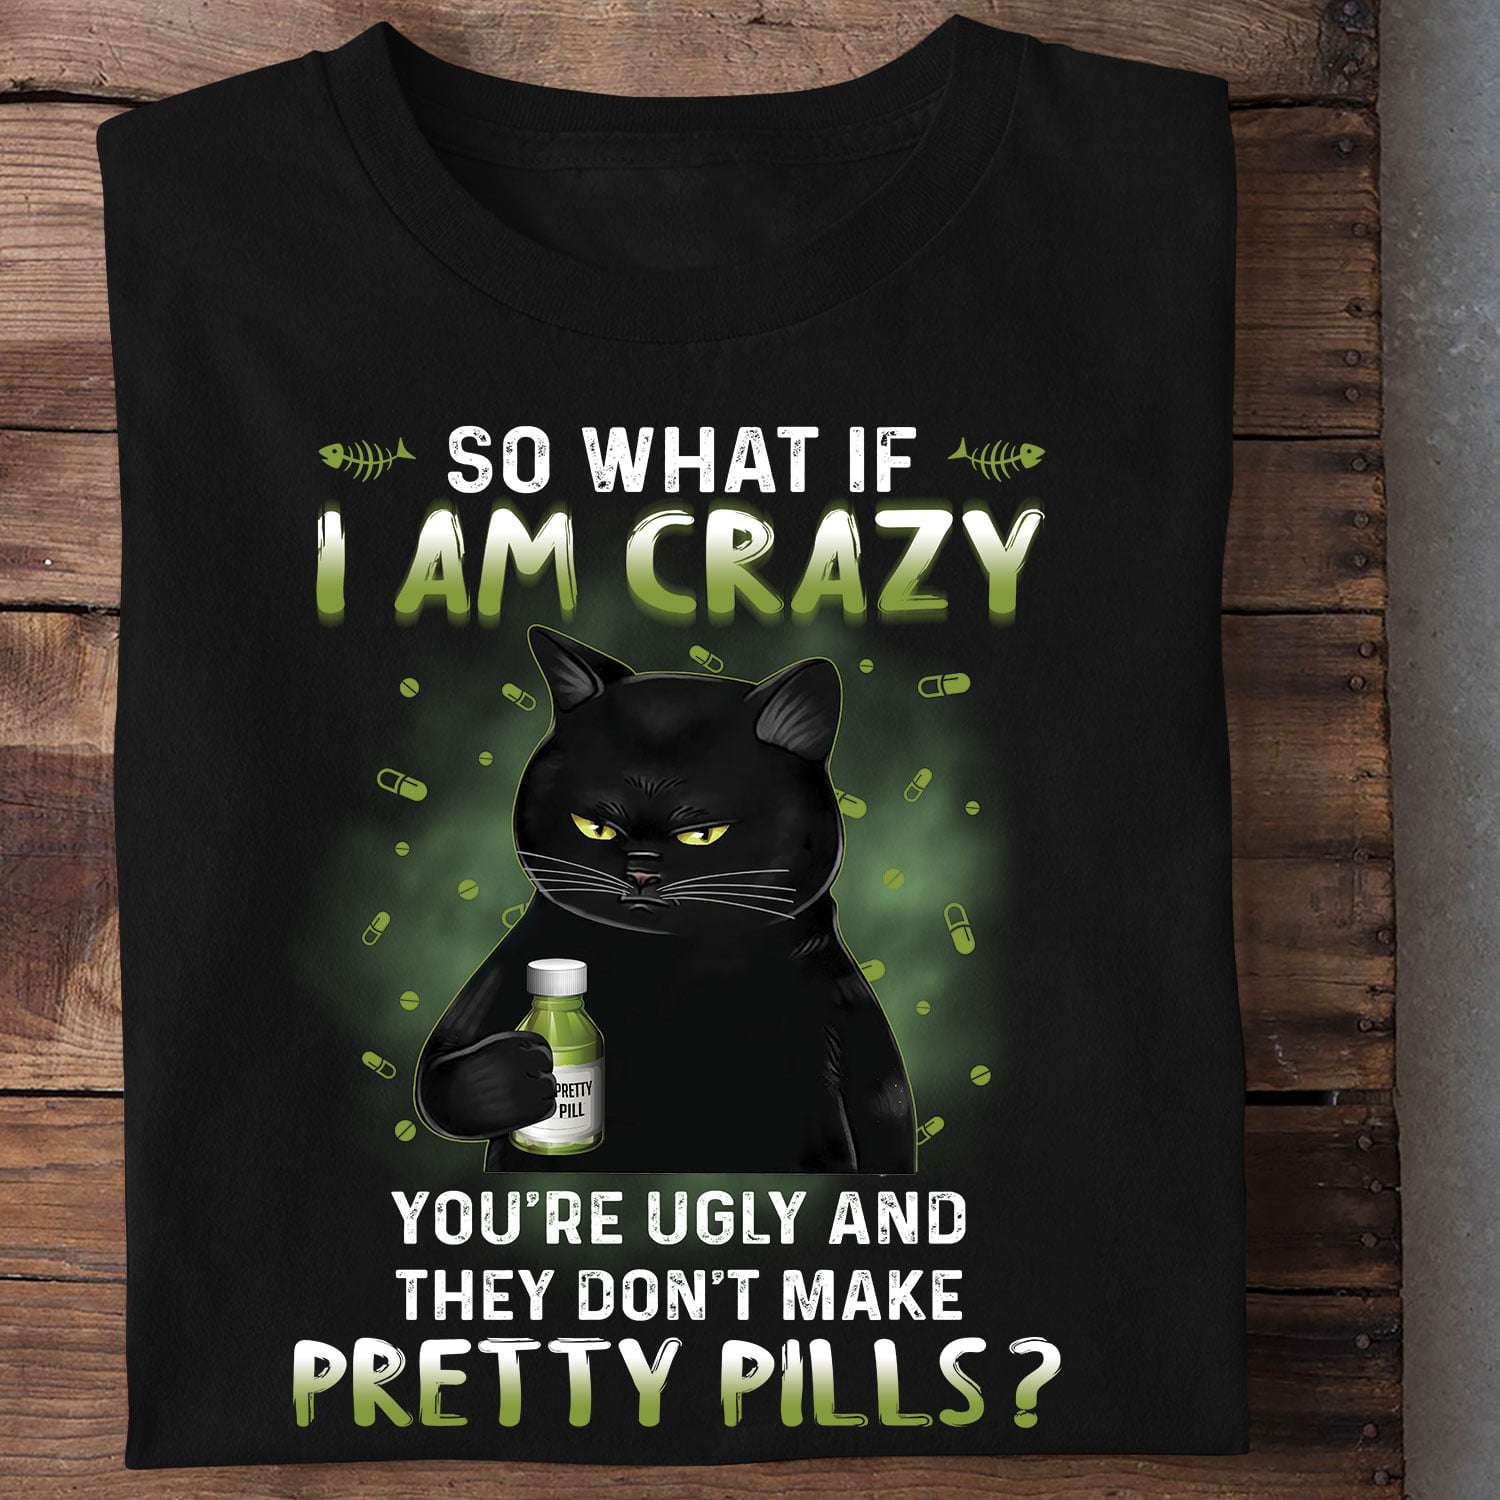 So what if I am crazy you're ugly and they don't make pretty pills - Black cat pretty pills